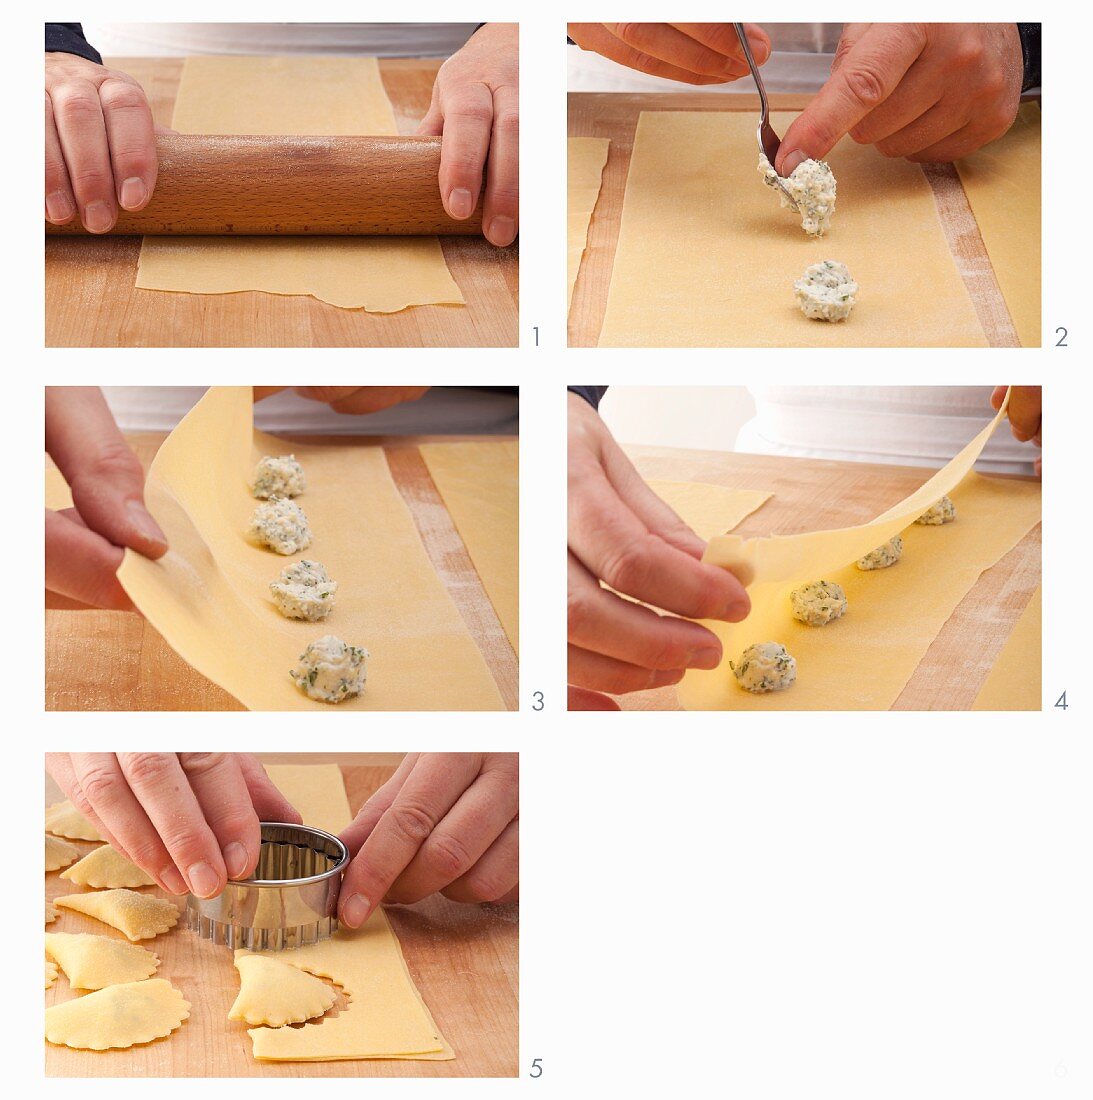 Ravioli with a ricotta and herb filling being made